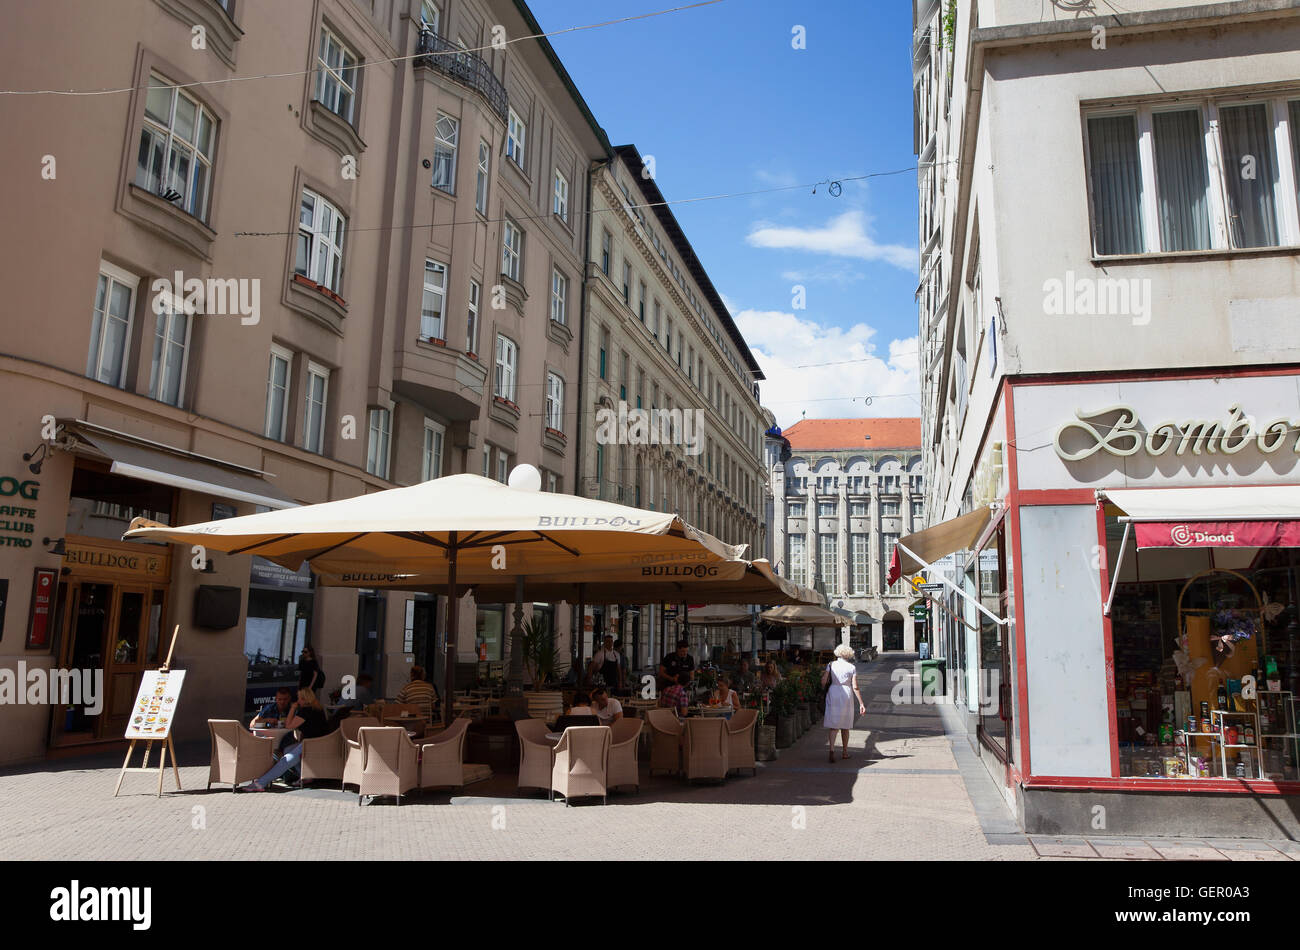 Croatia, Zagreb, Old town, Cafe outdoor seating on Frana Petrica street. Stock Photo